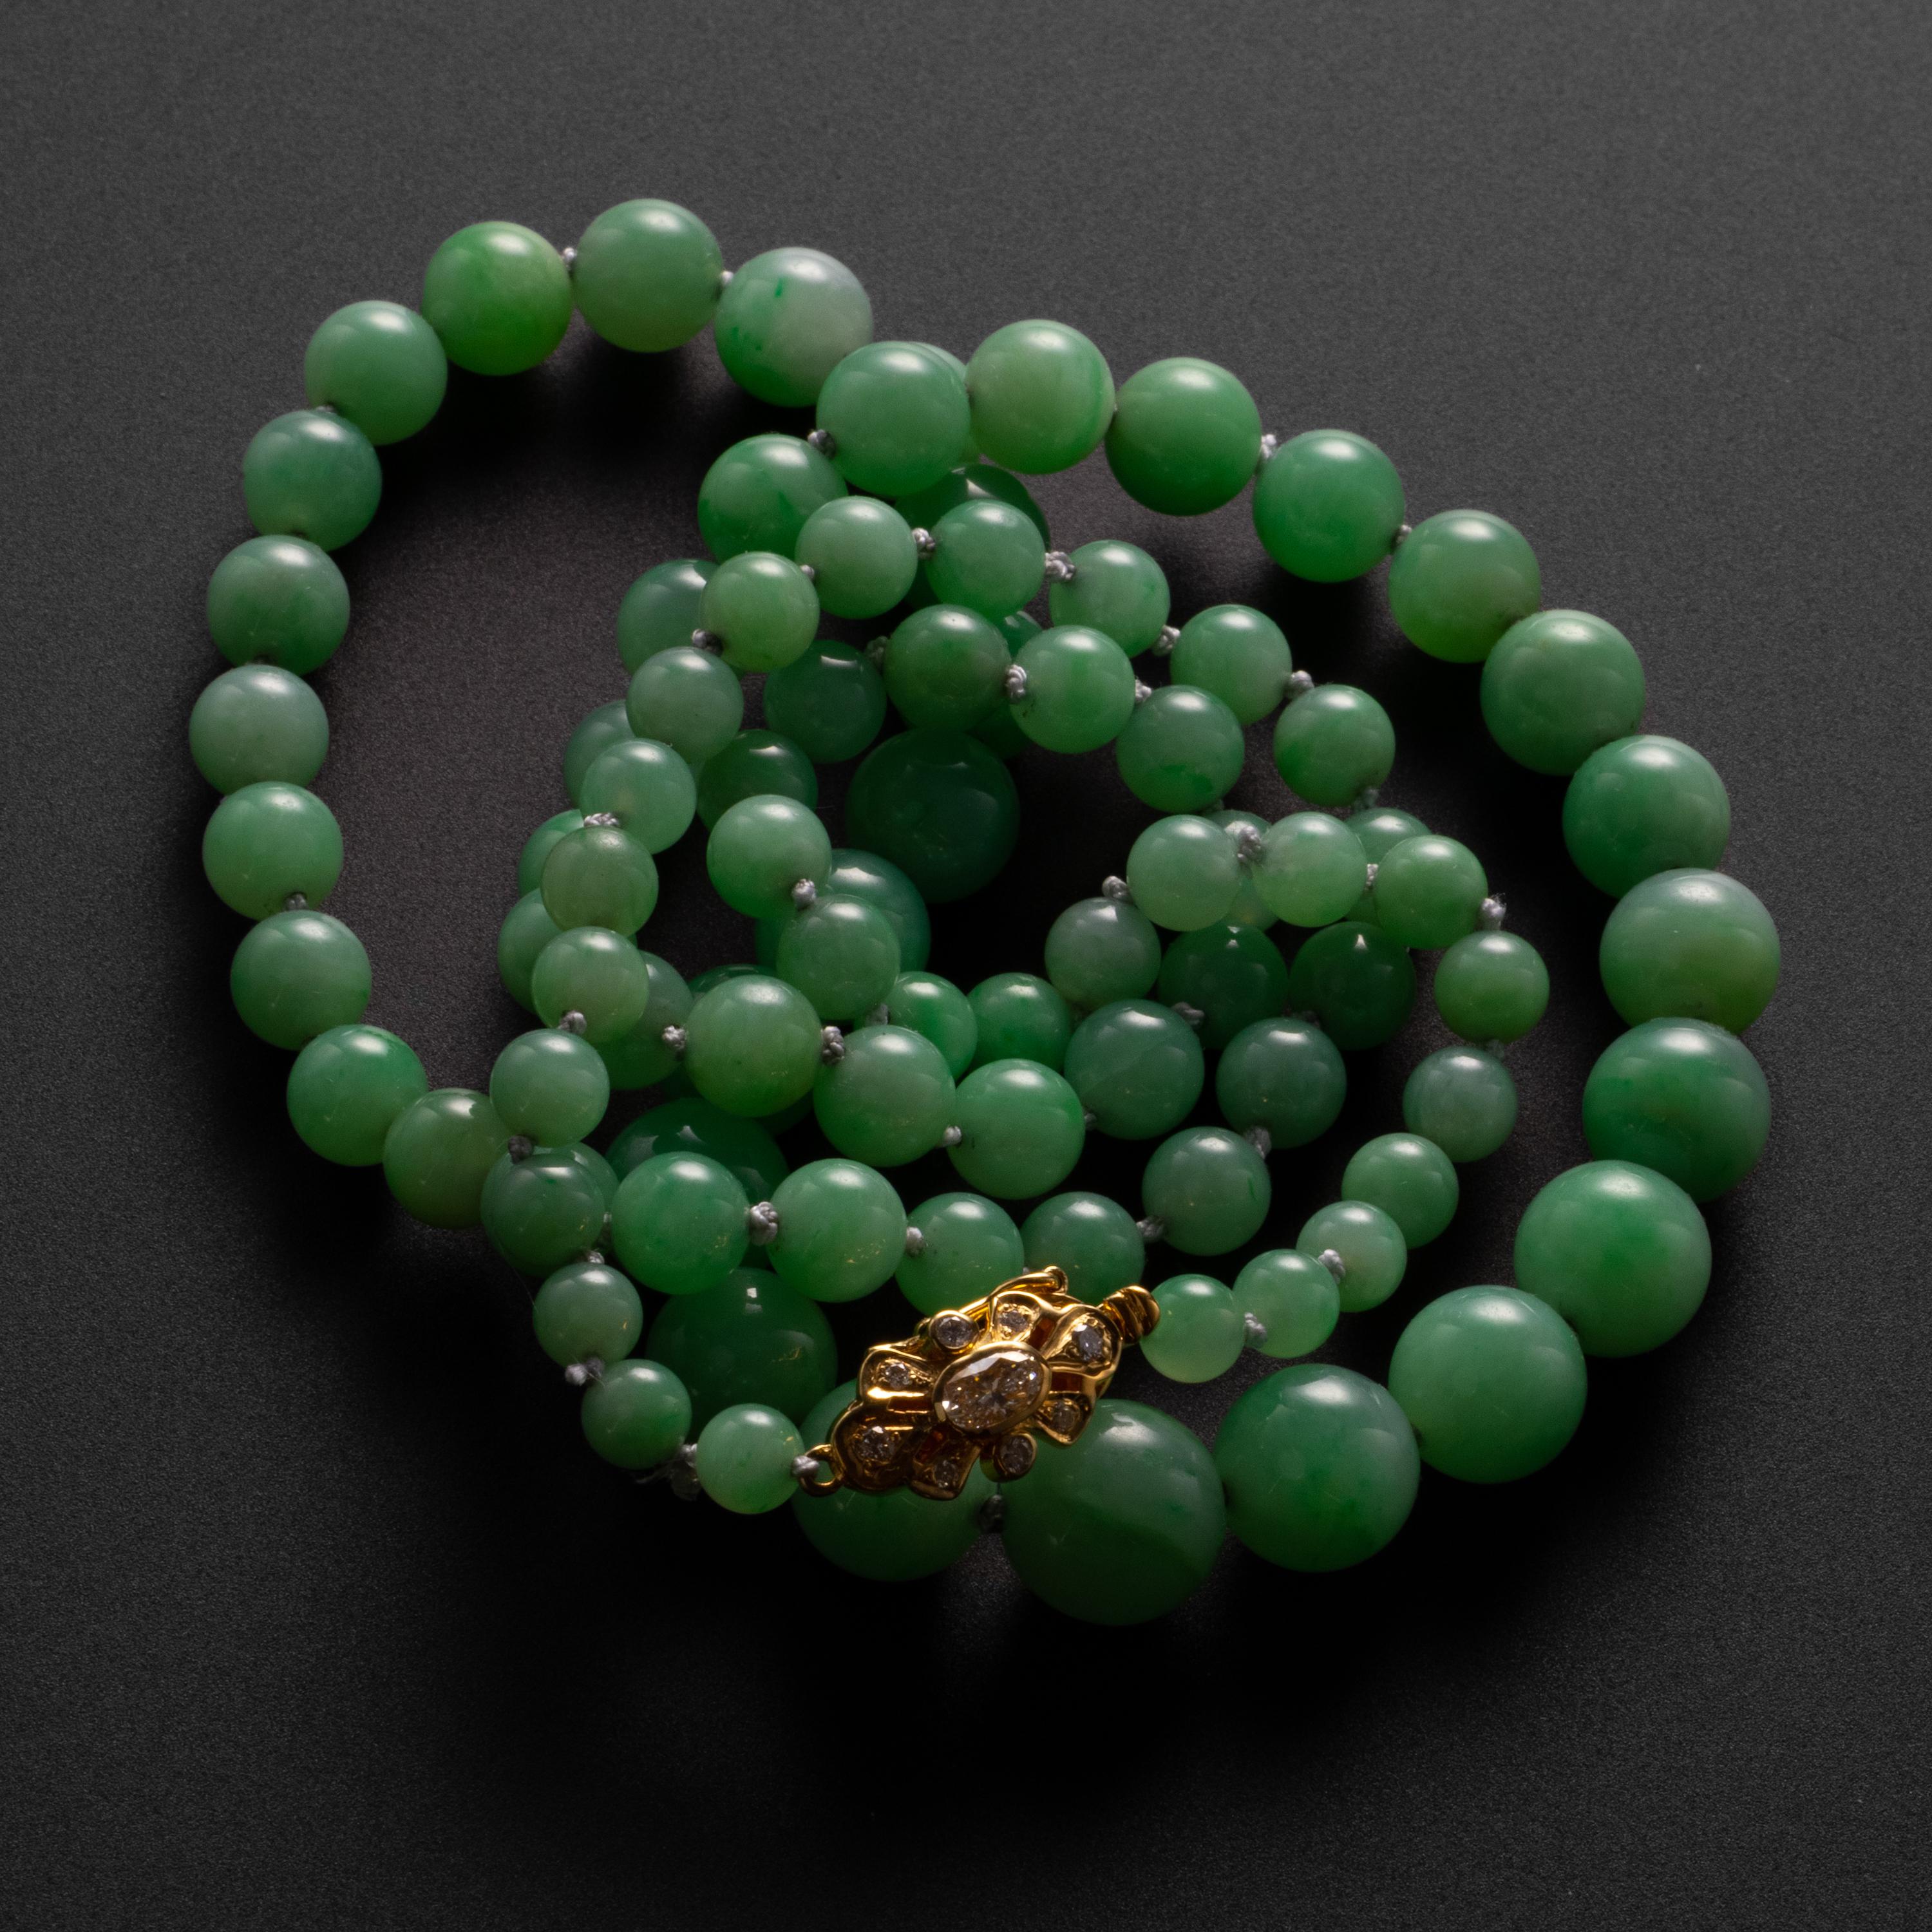 Rarely -if ever- have I come across a light apple-green jadeite necklace with such a fine grain and evenness of tone. The highly translucent beads have such a high polish and pure, even tone, that it seems both amazing and impossible that these